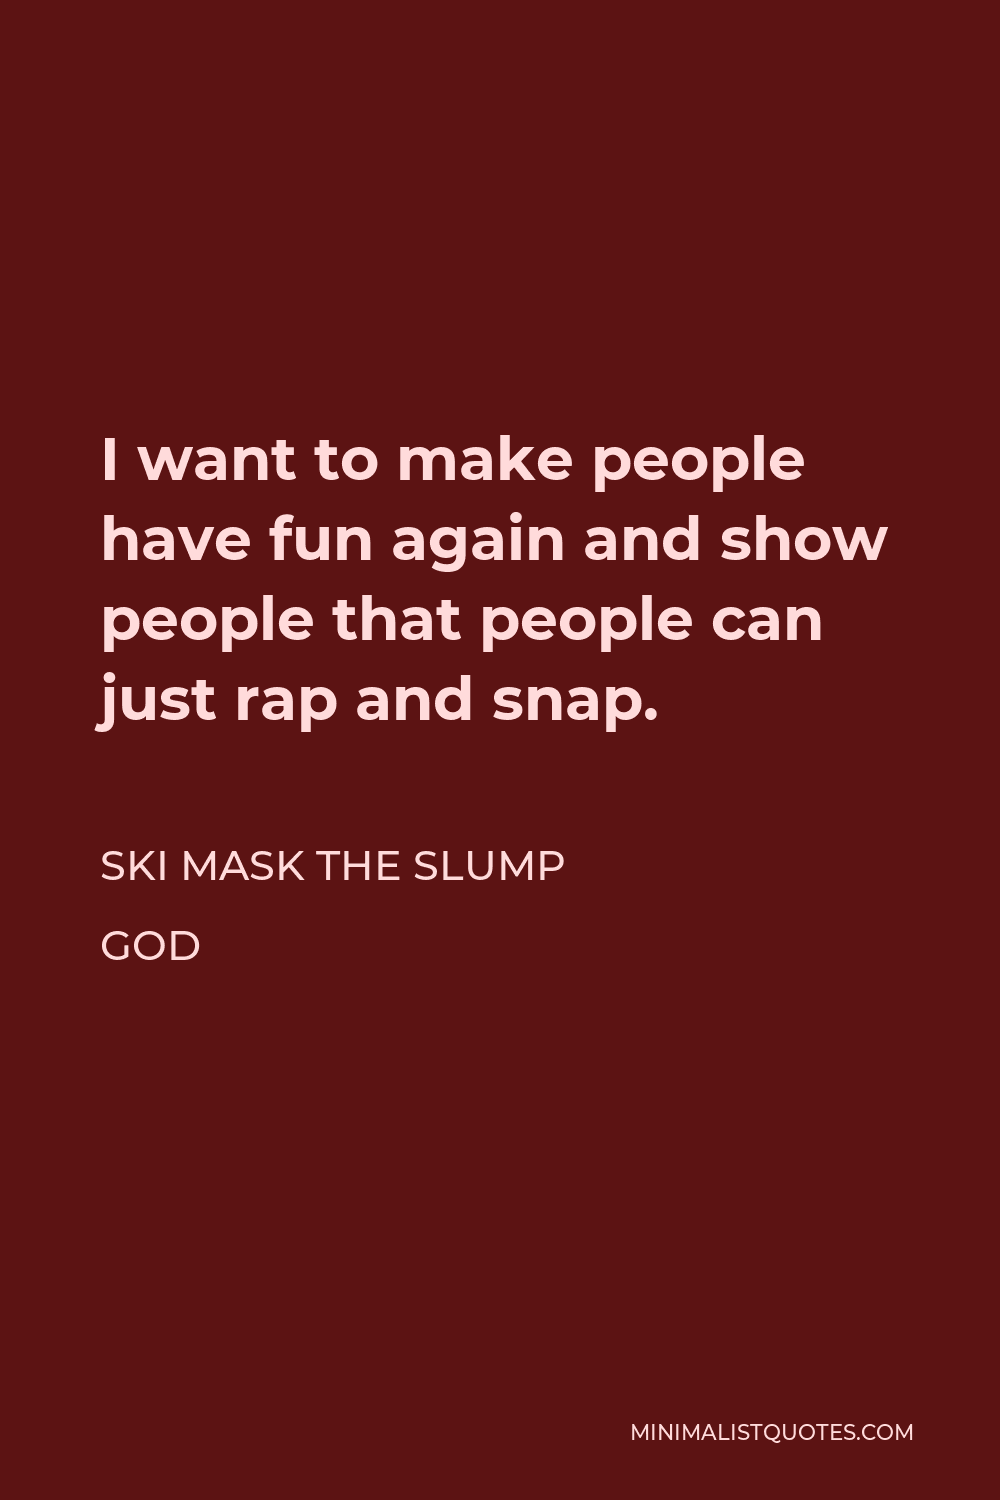 Ski Mask the Slump God Quote - I want to make people have fun again and show people that people can just rap and snap.